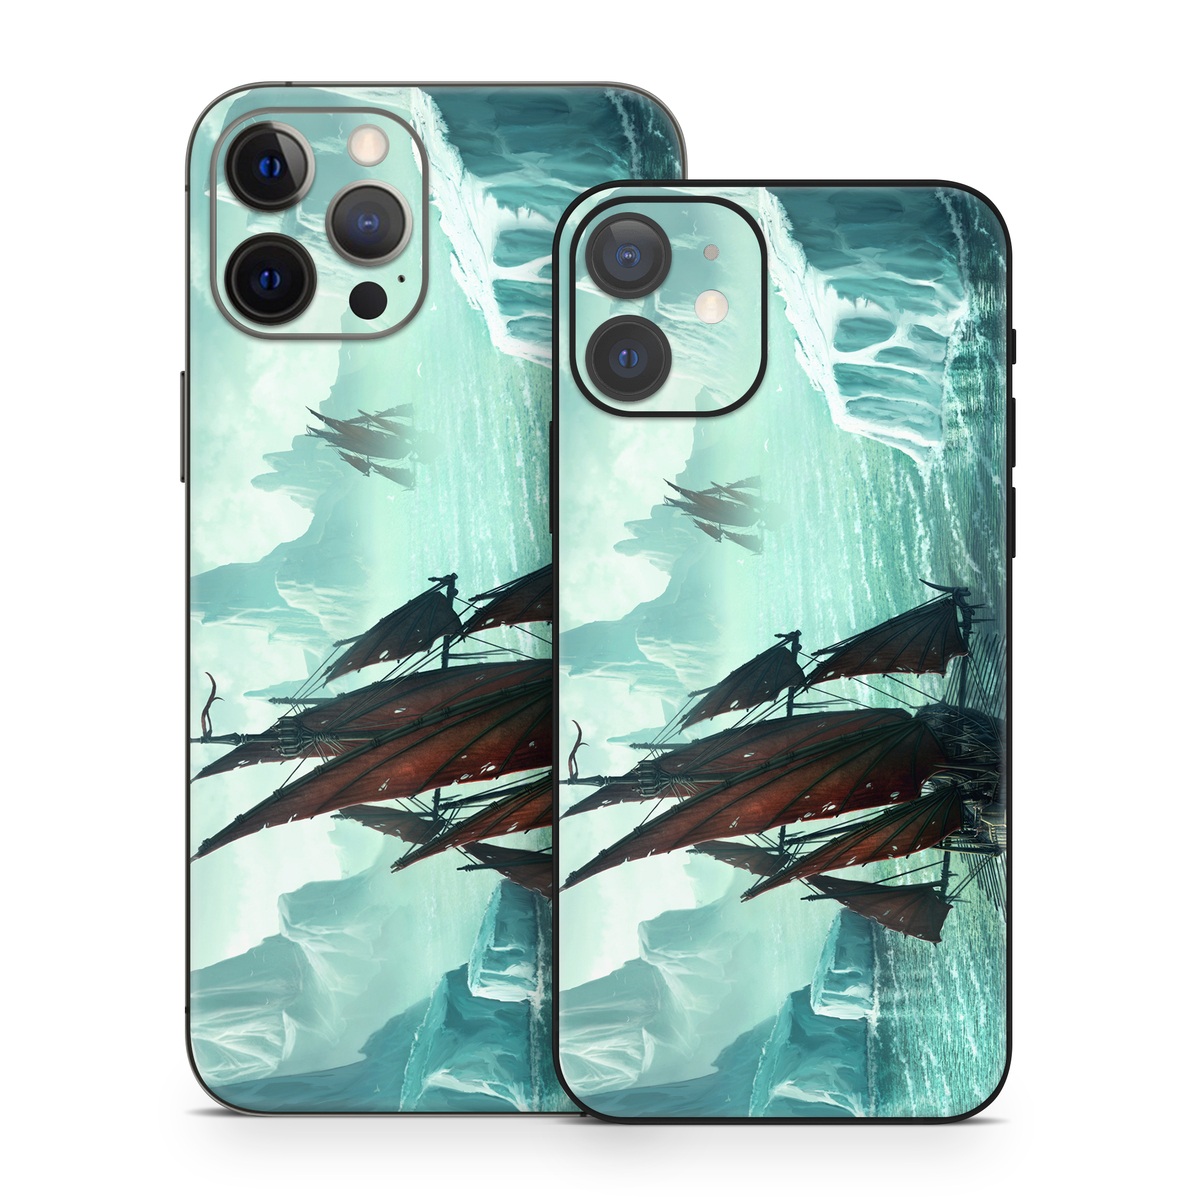 iPhone 12 Series Skin design of Cg artwork, Vehicle, Ghost ship, Manila galleon, Fluyt, Adventure game, First-rate, Sailing ship, Mythology, Strategy video game, with gray, black, blue, green, white colors